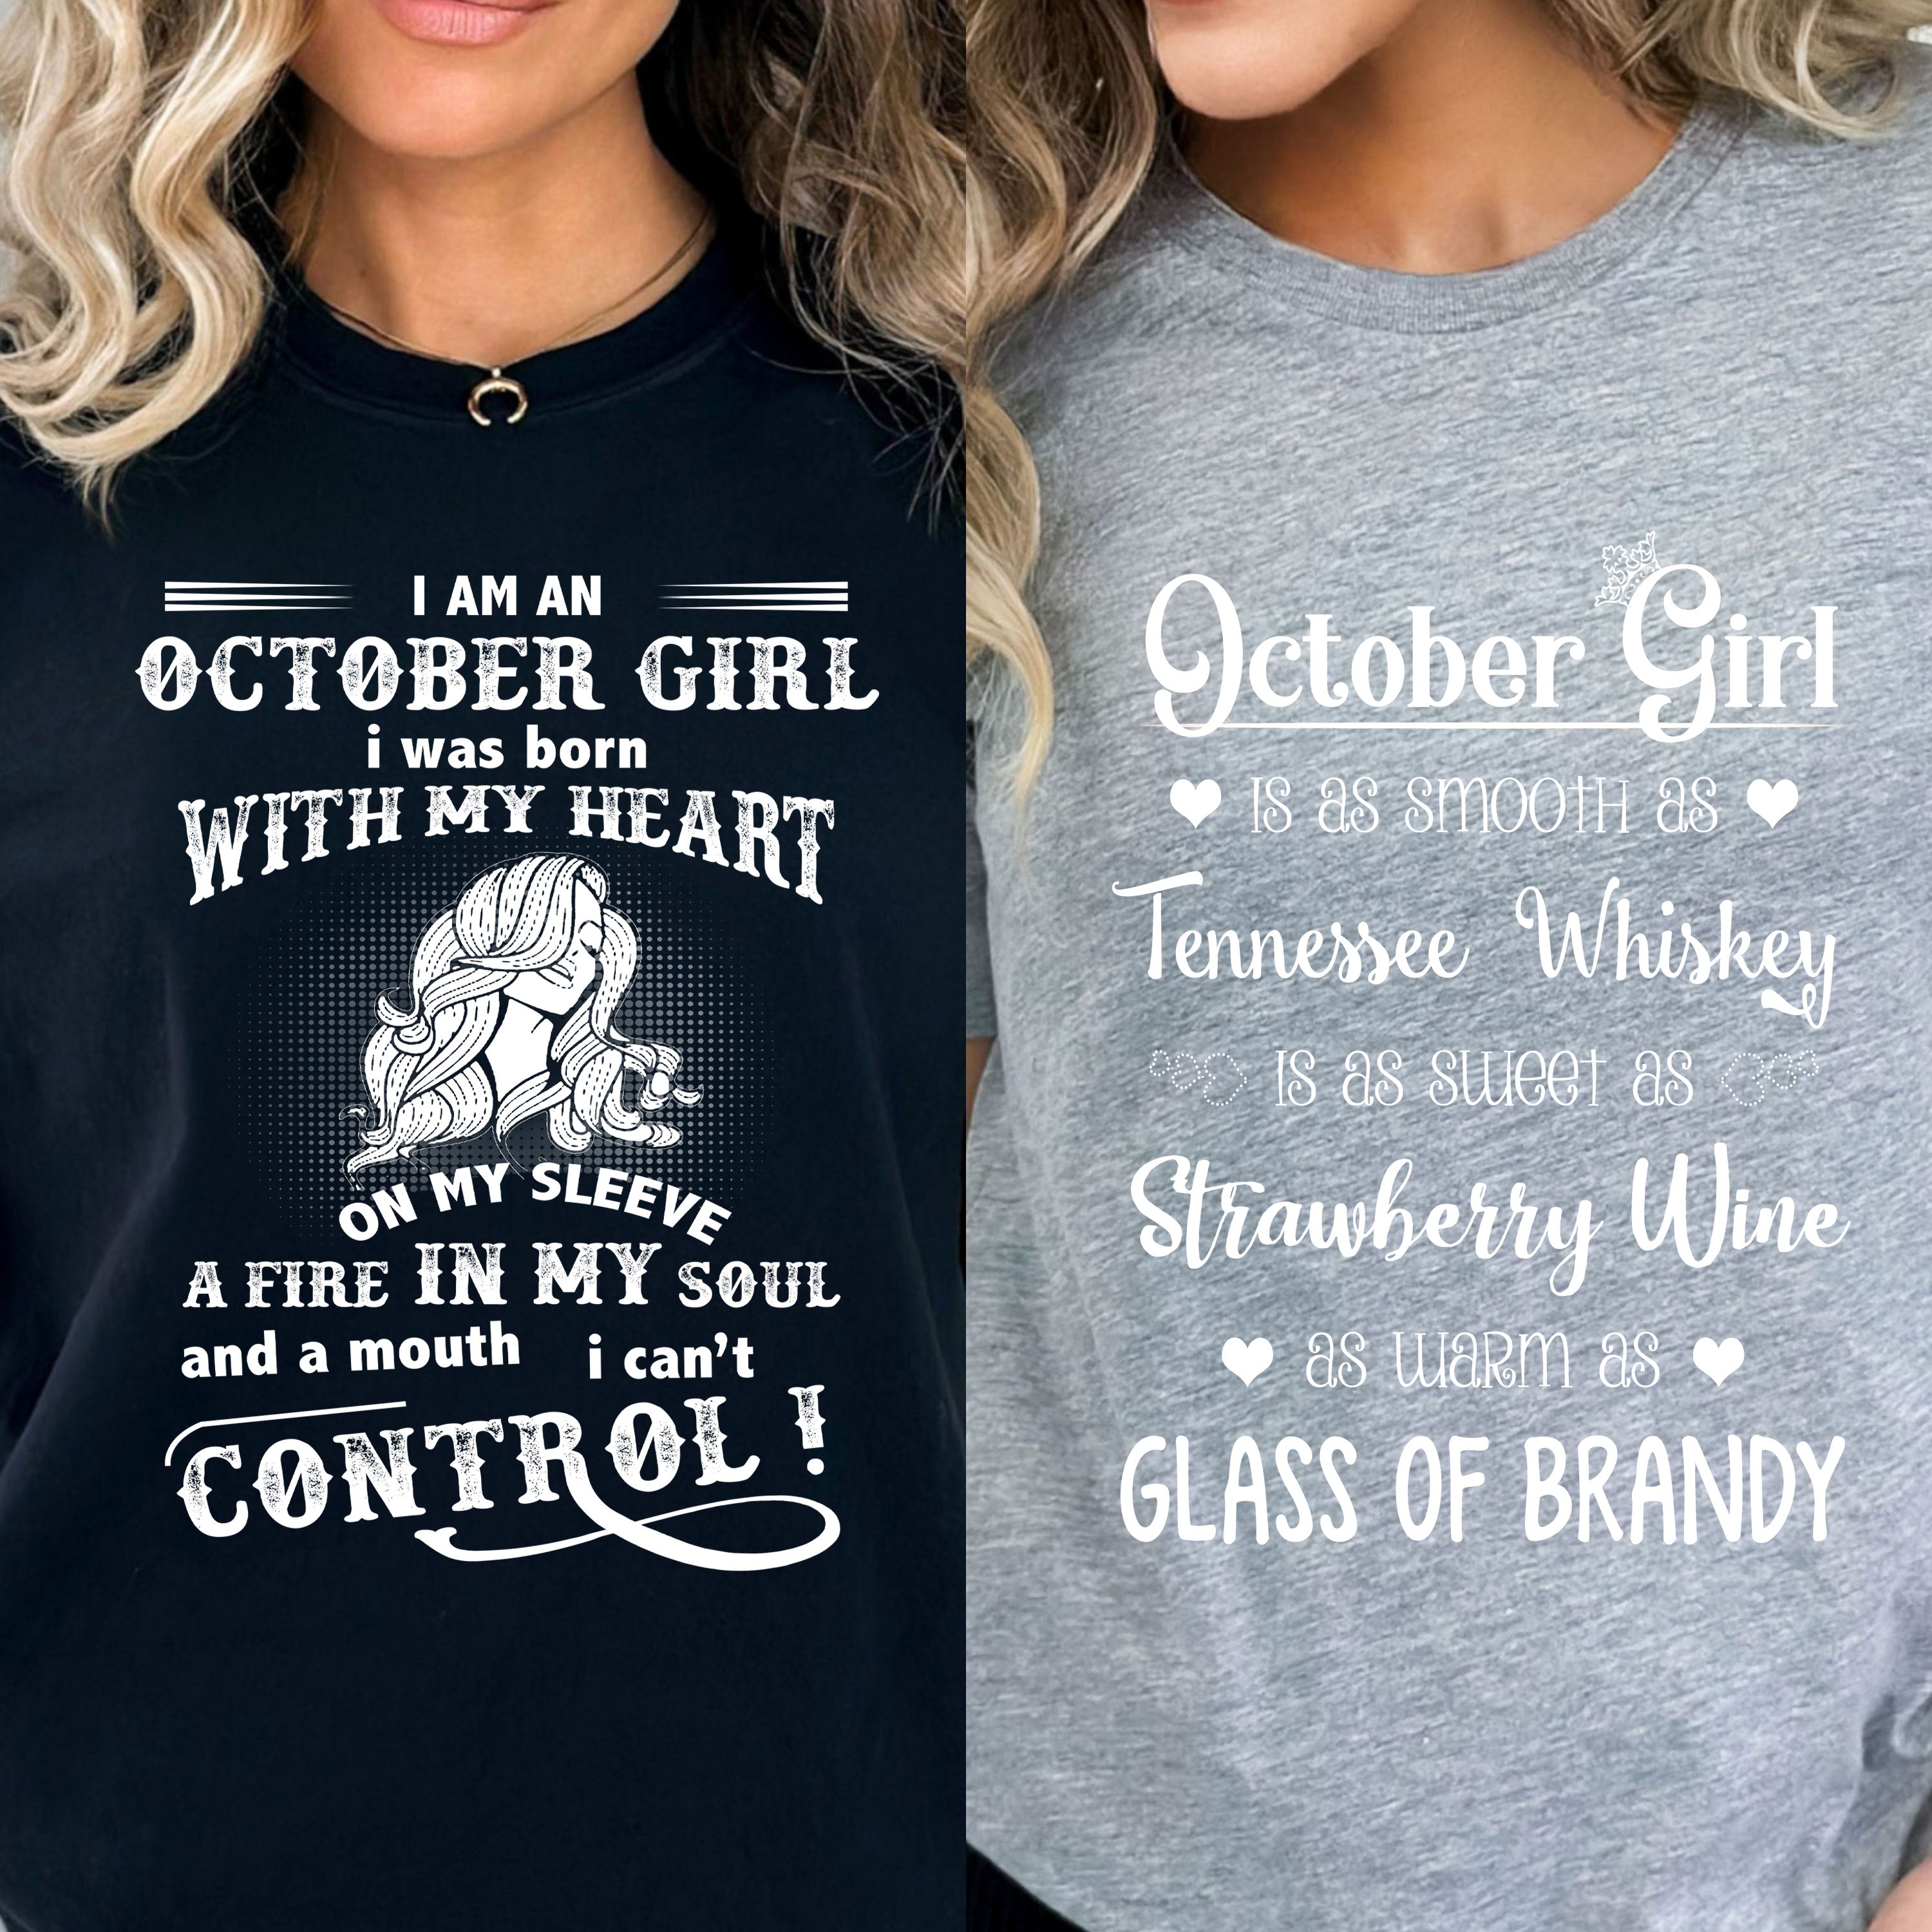 "October Whiskey + Control -Pack of 2".